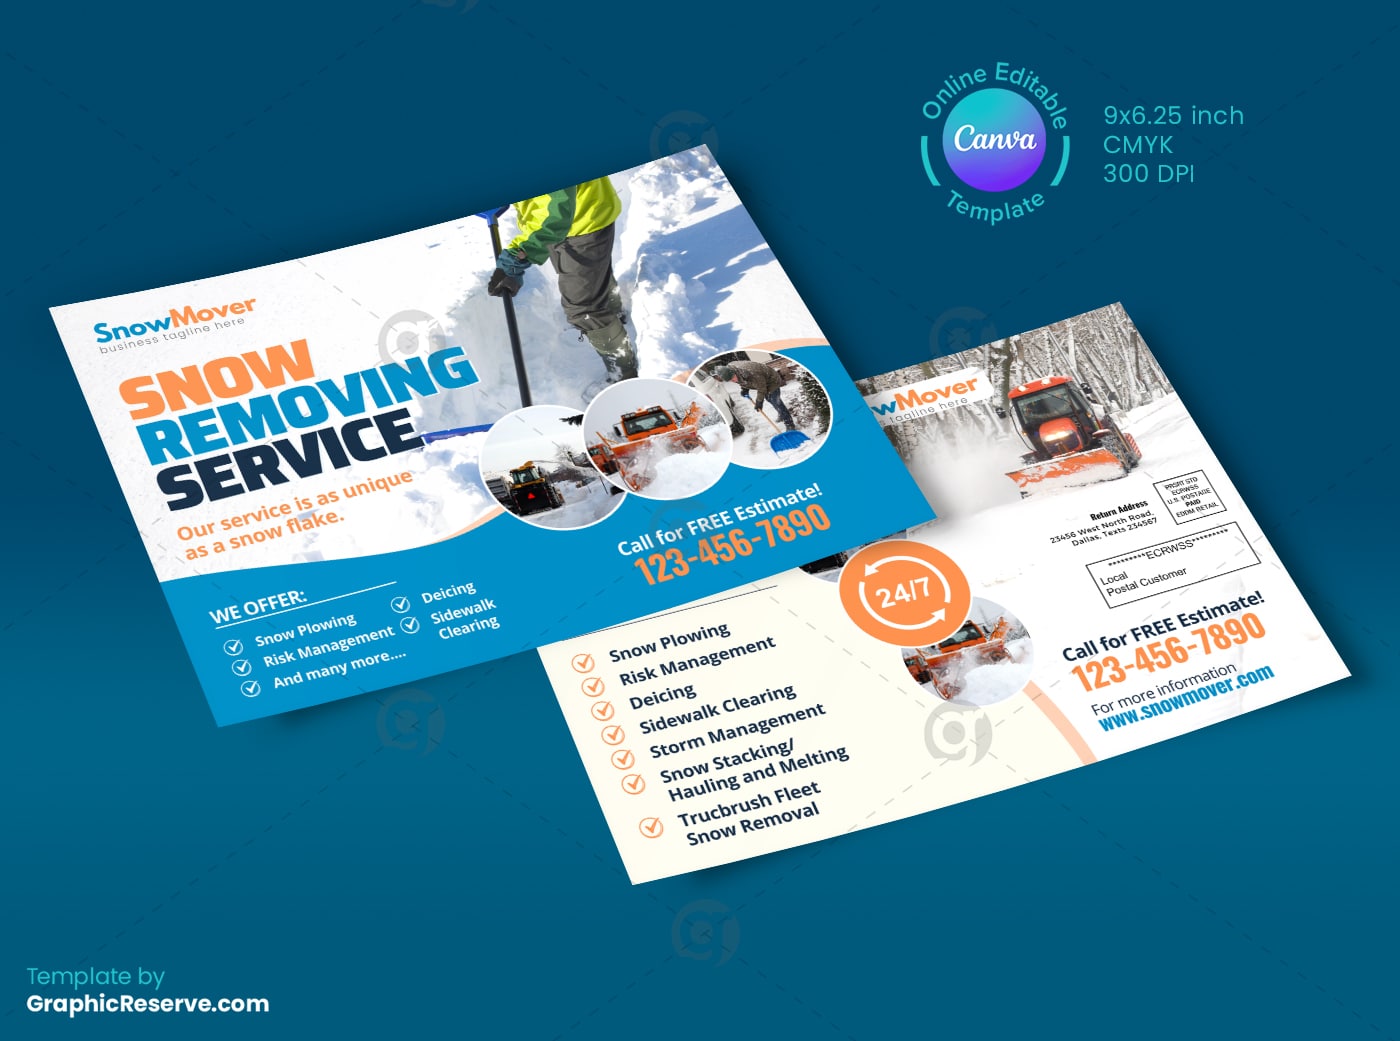 Snow Removing Service EDDM Mailer Template (Canva Format) - Graphic Reserve